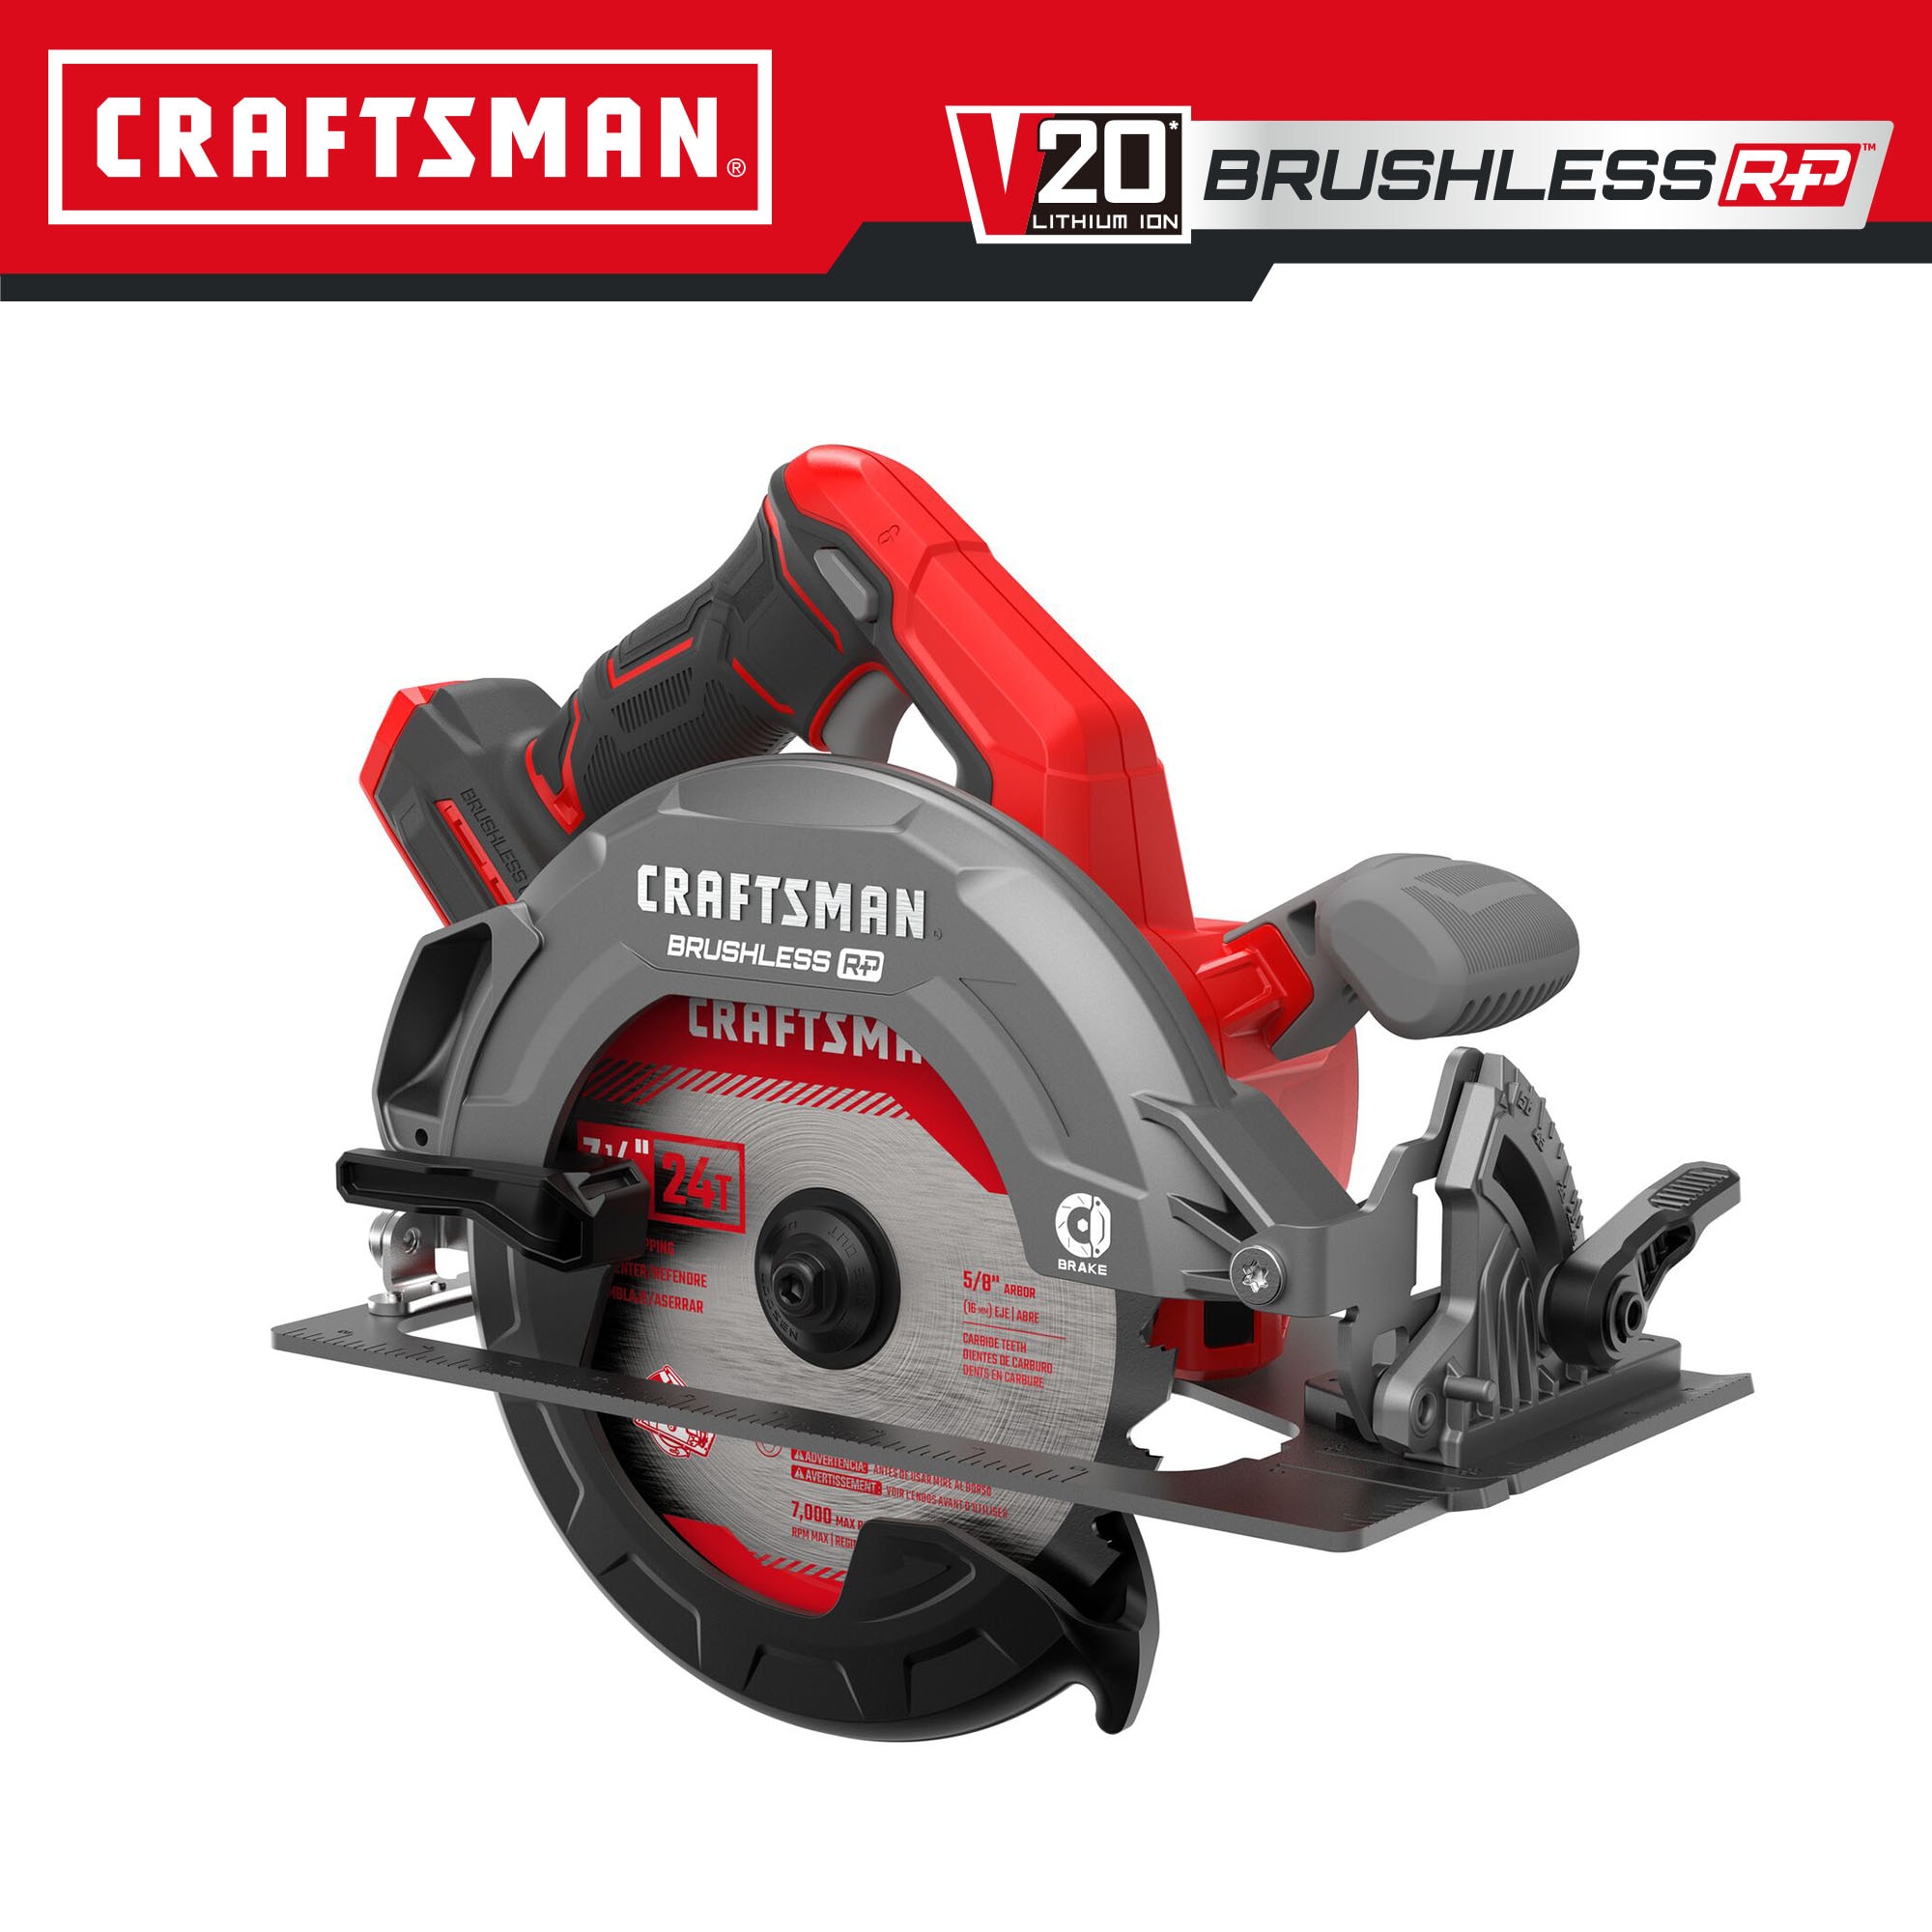 CRAFTSMAN 7-1/4-Inch Circular Saw 15-Amp with Reciprocating Saw CMES510 & CMES300 7.5-Amp